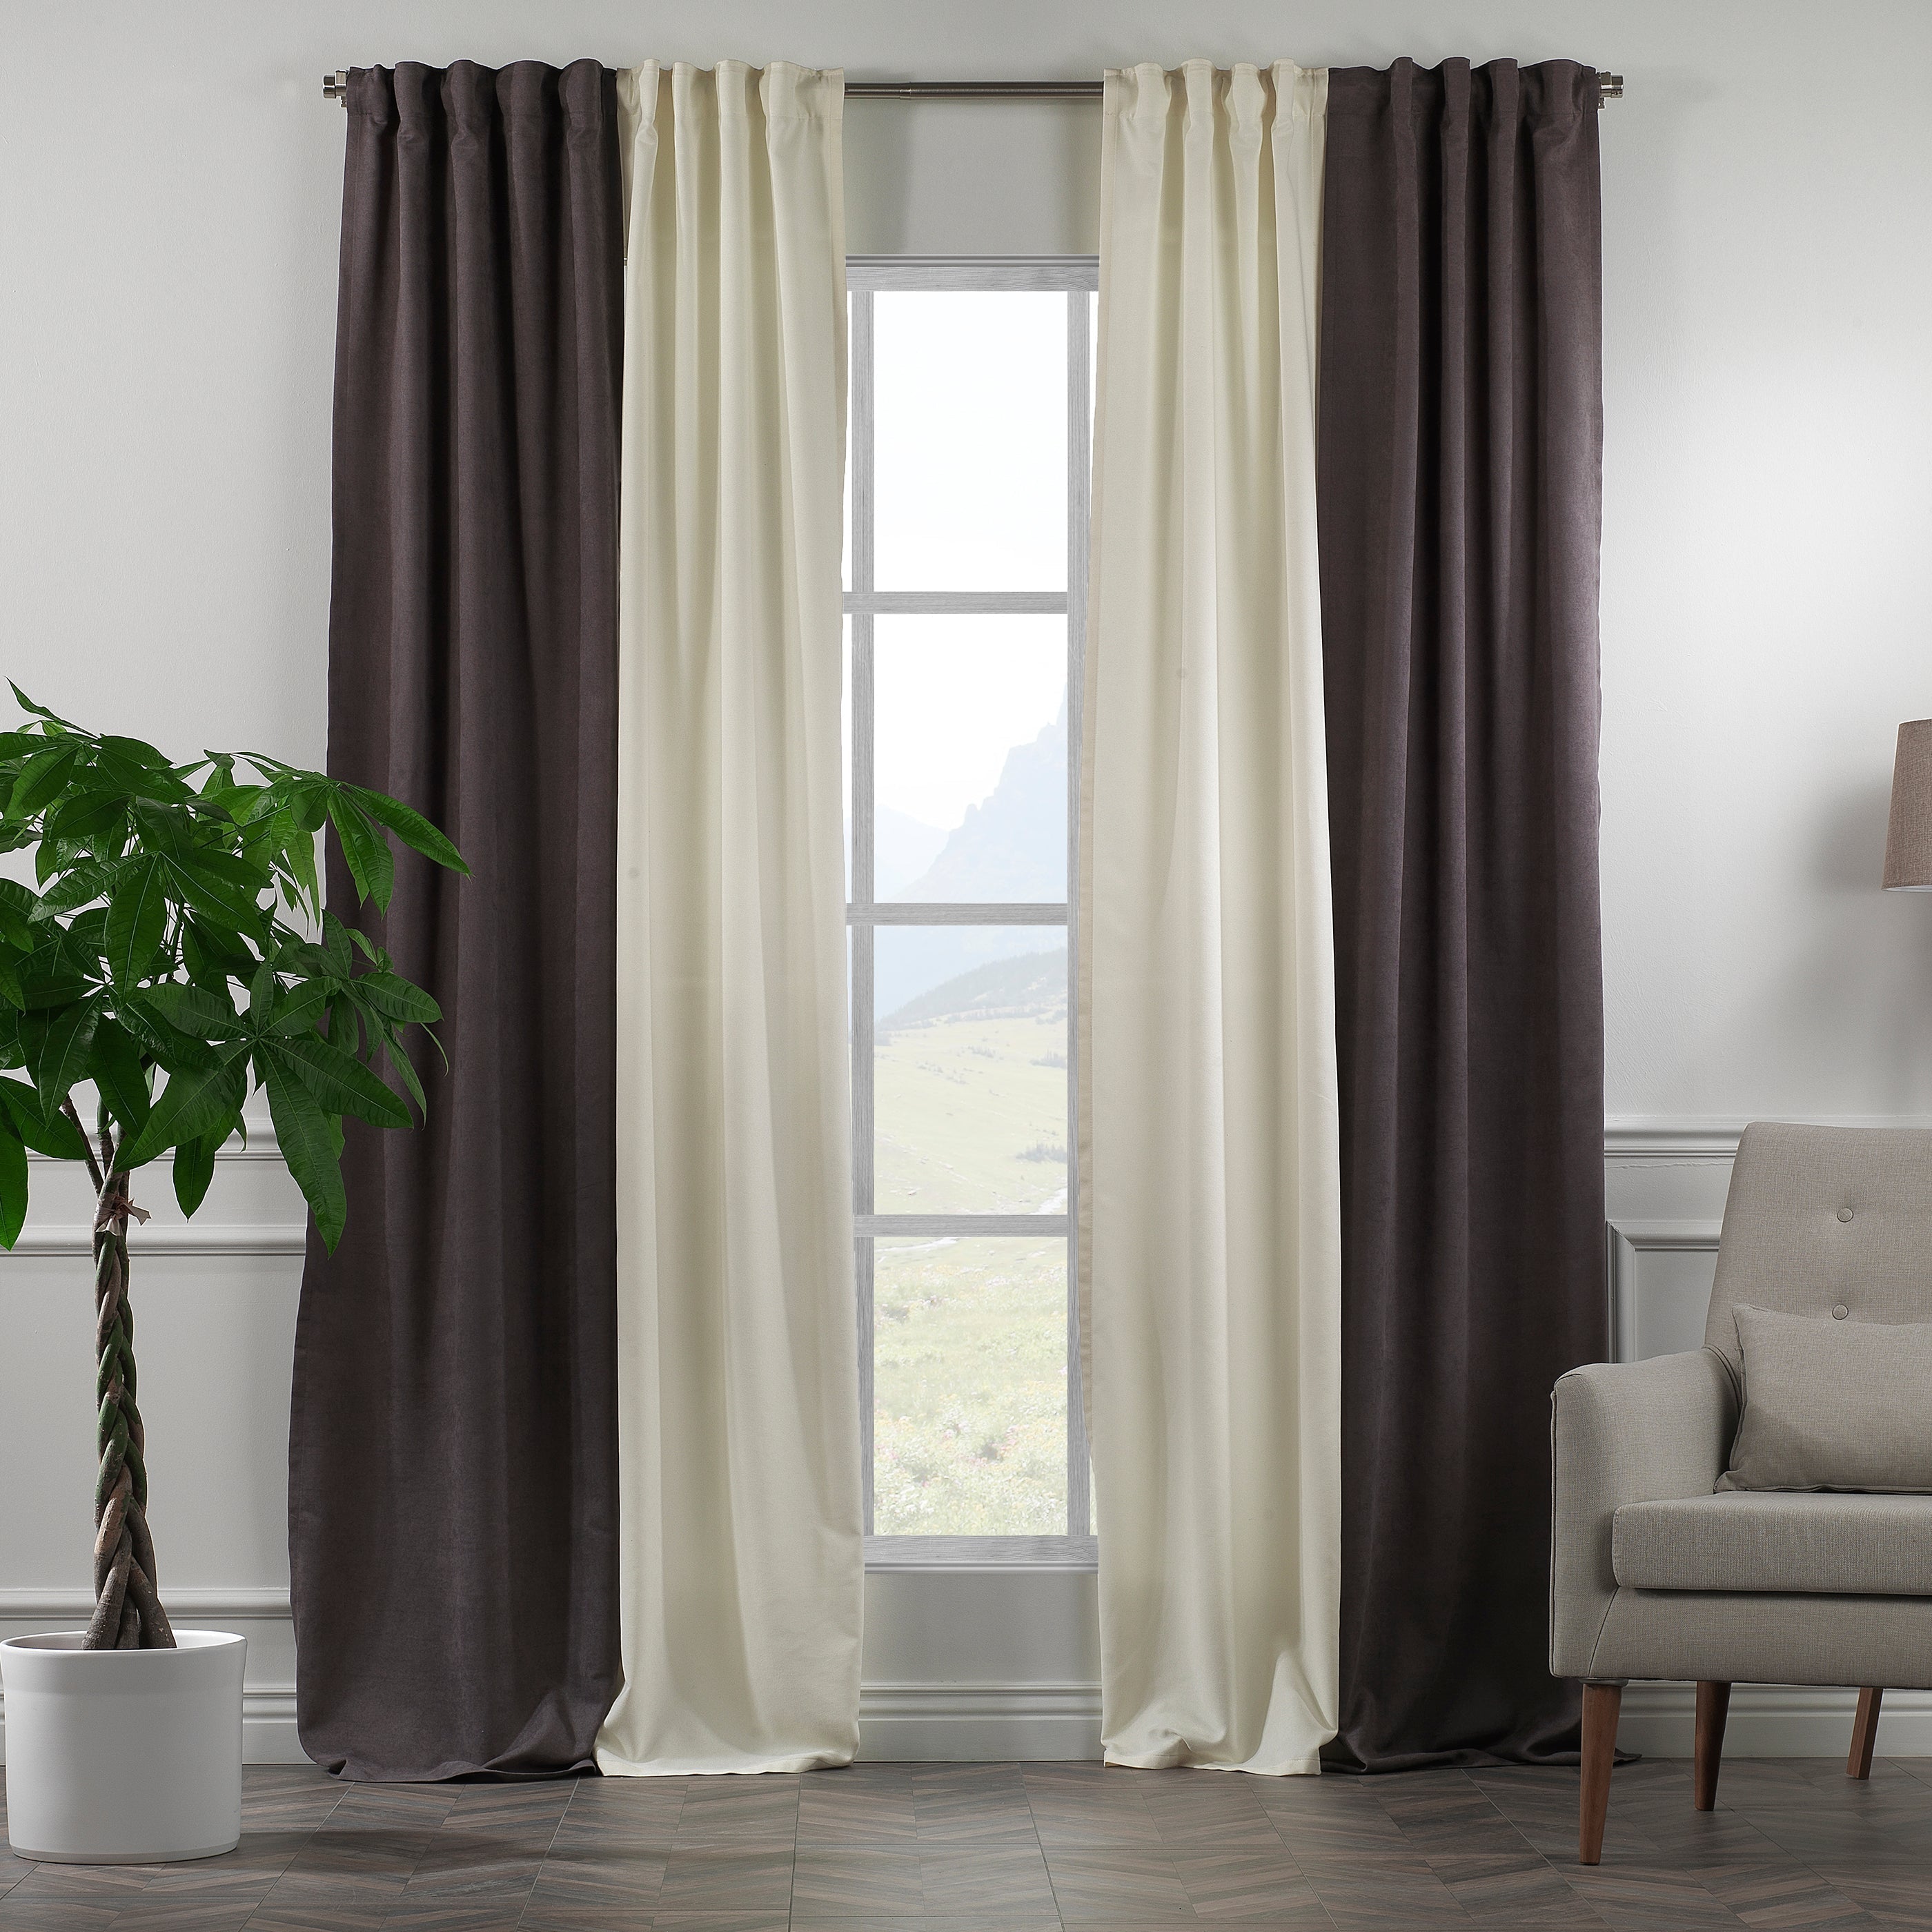 Solid Combined Mix And Match 4 Panels Curtains With 2 Color Combinatio Beshomedesign